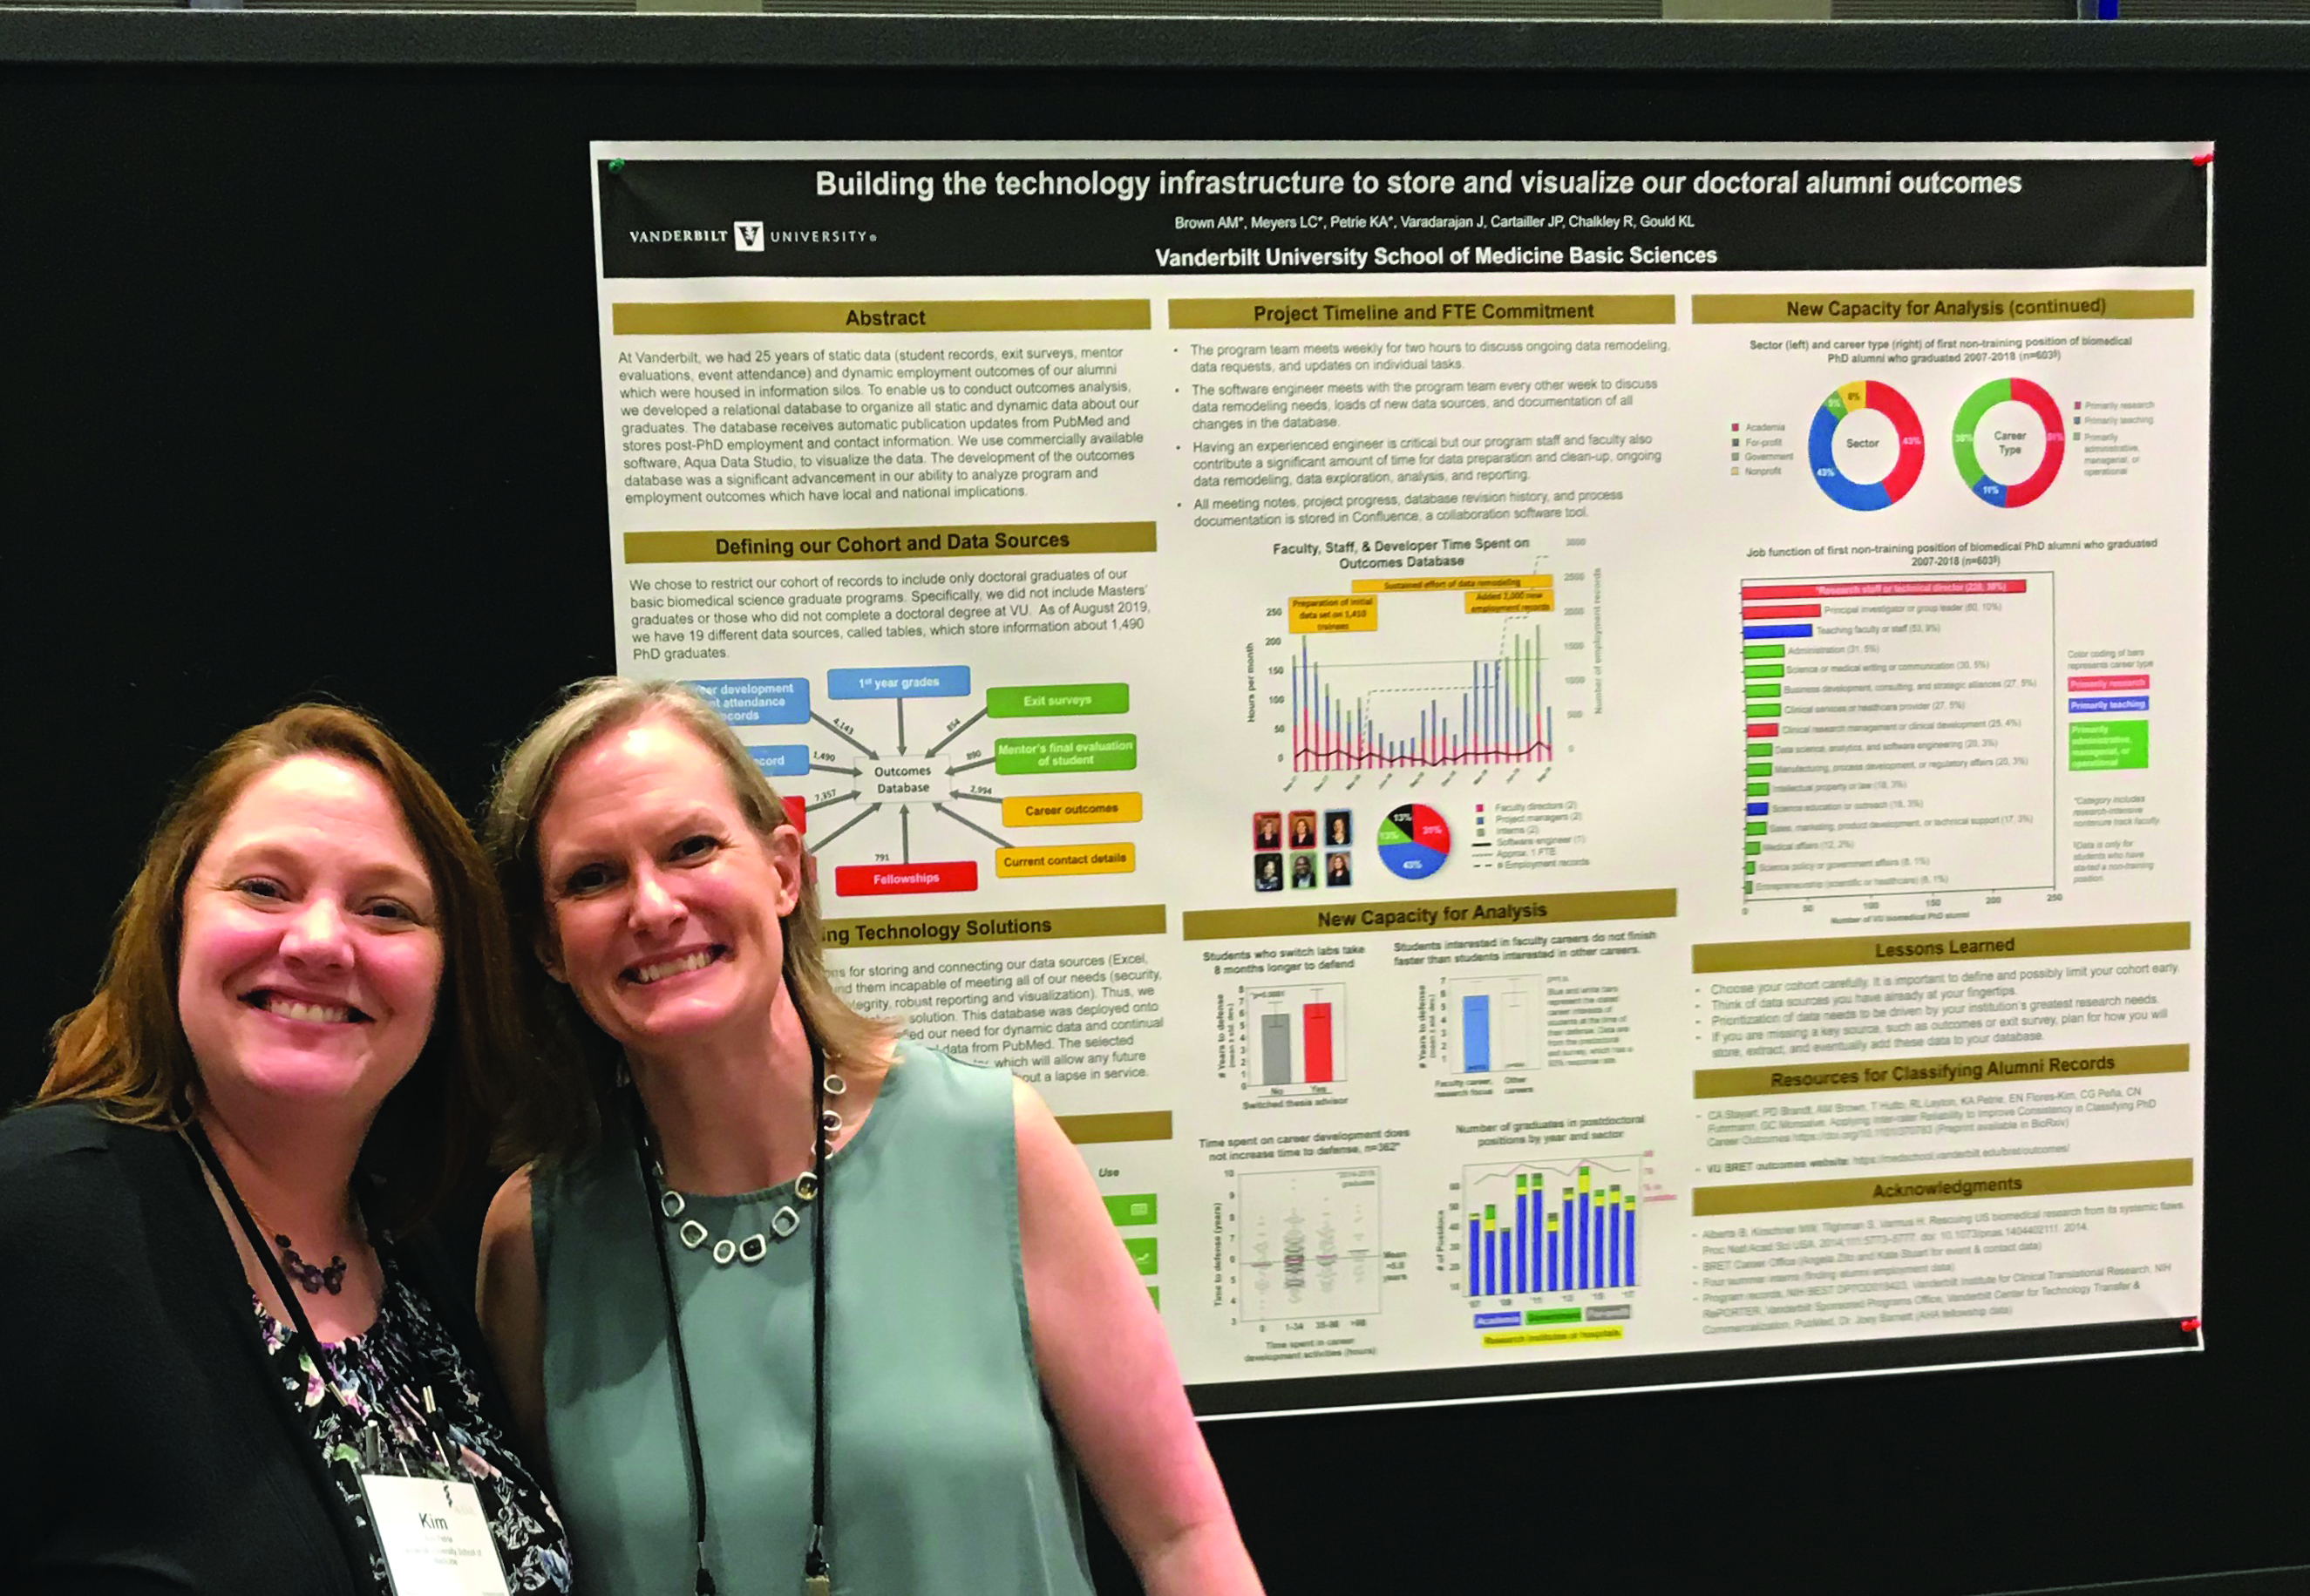 Kim Petrie poses with Abigail Brown, director of the Office of Outcomes Research, in front of a poster they presented at a conference.